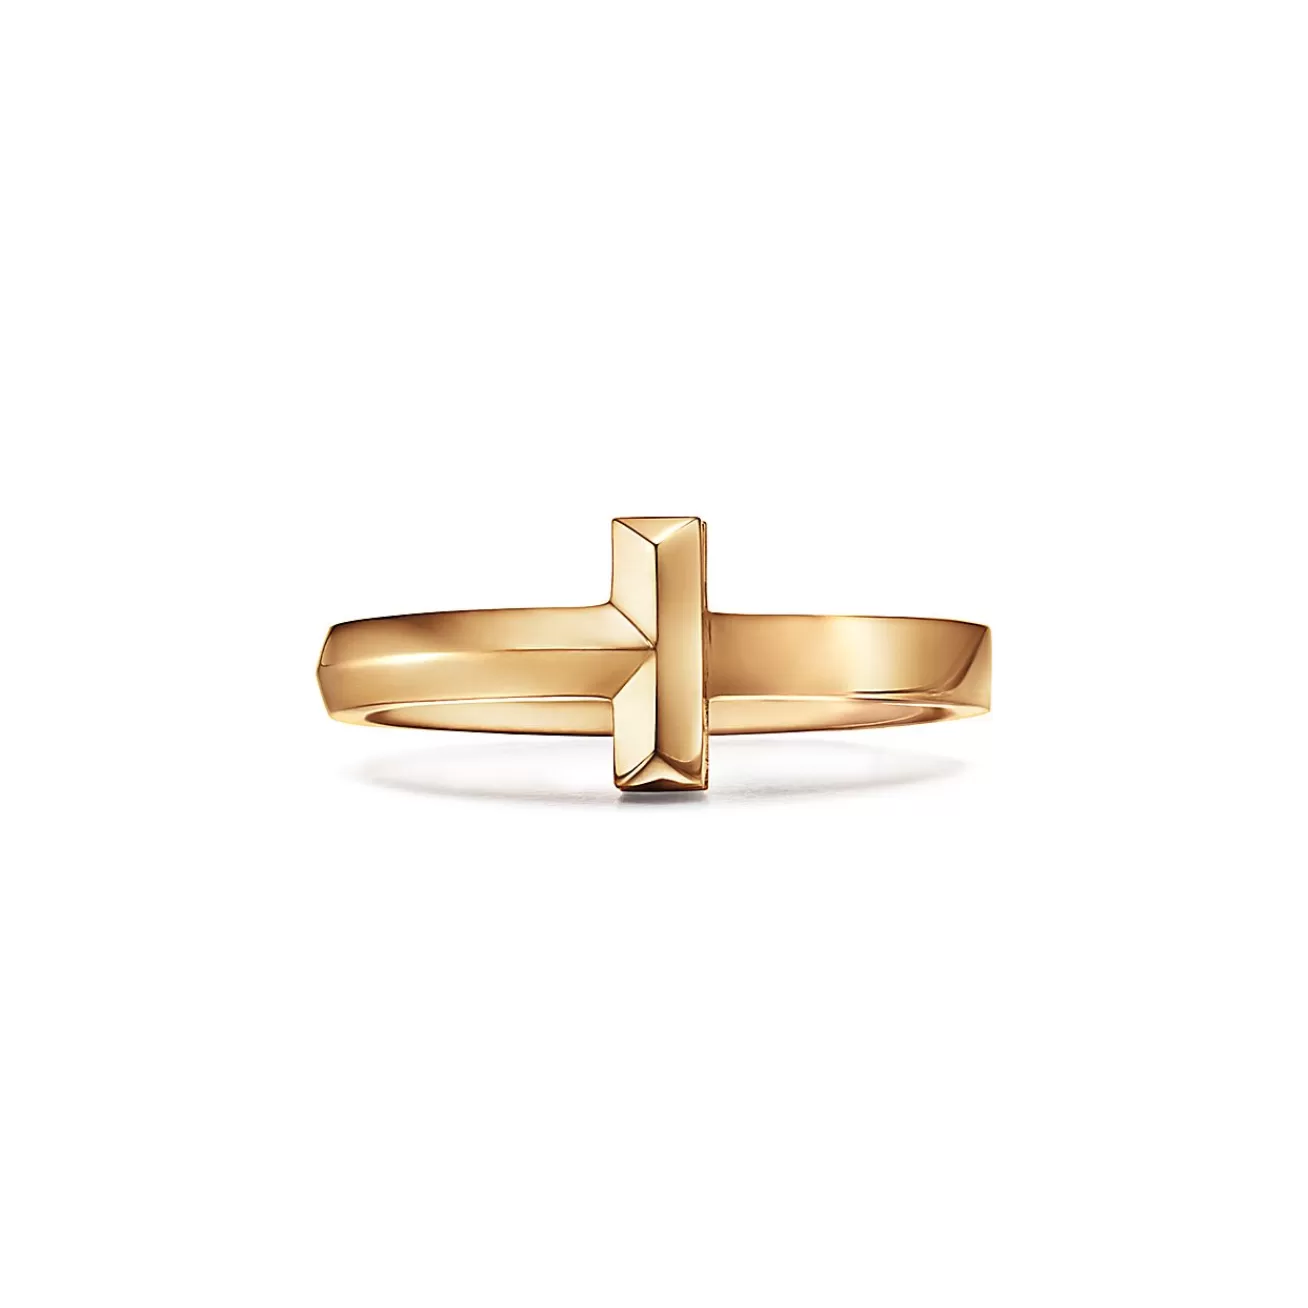 Tiffany & Co. Tiffany T T1 Ring in Yellow Gold, 2.5 mm Wide | ^ Rings | Men's Jewelry